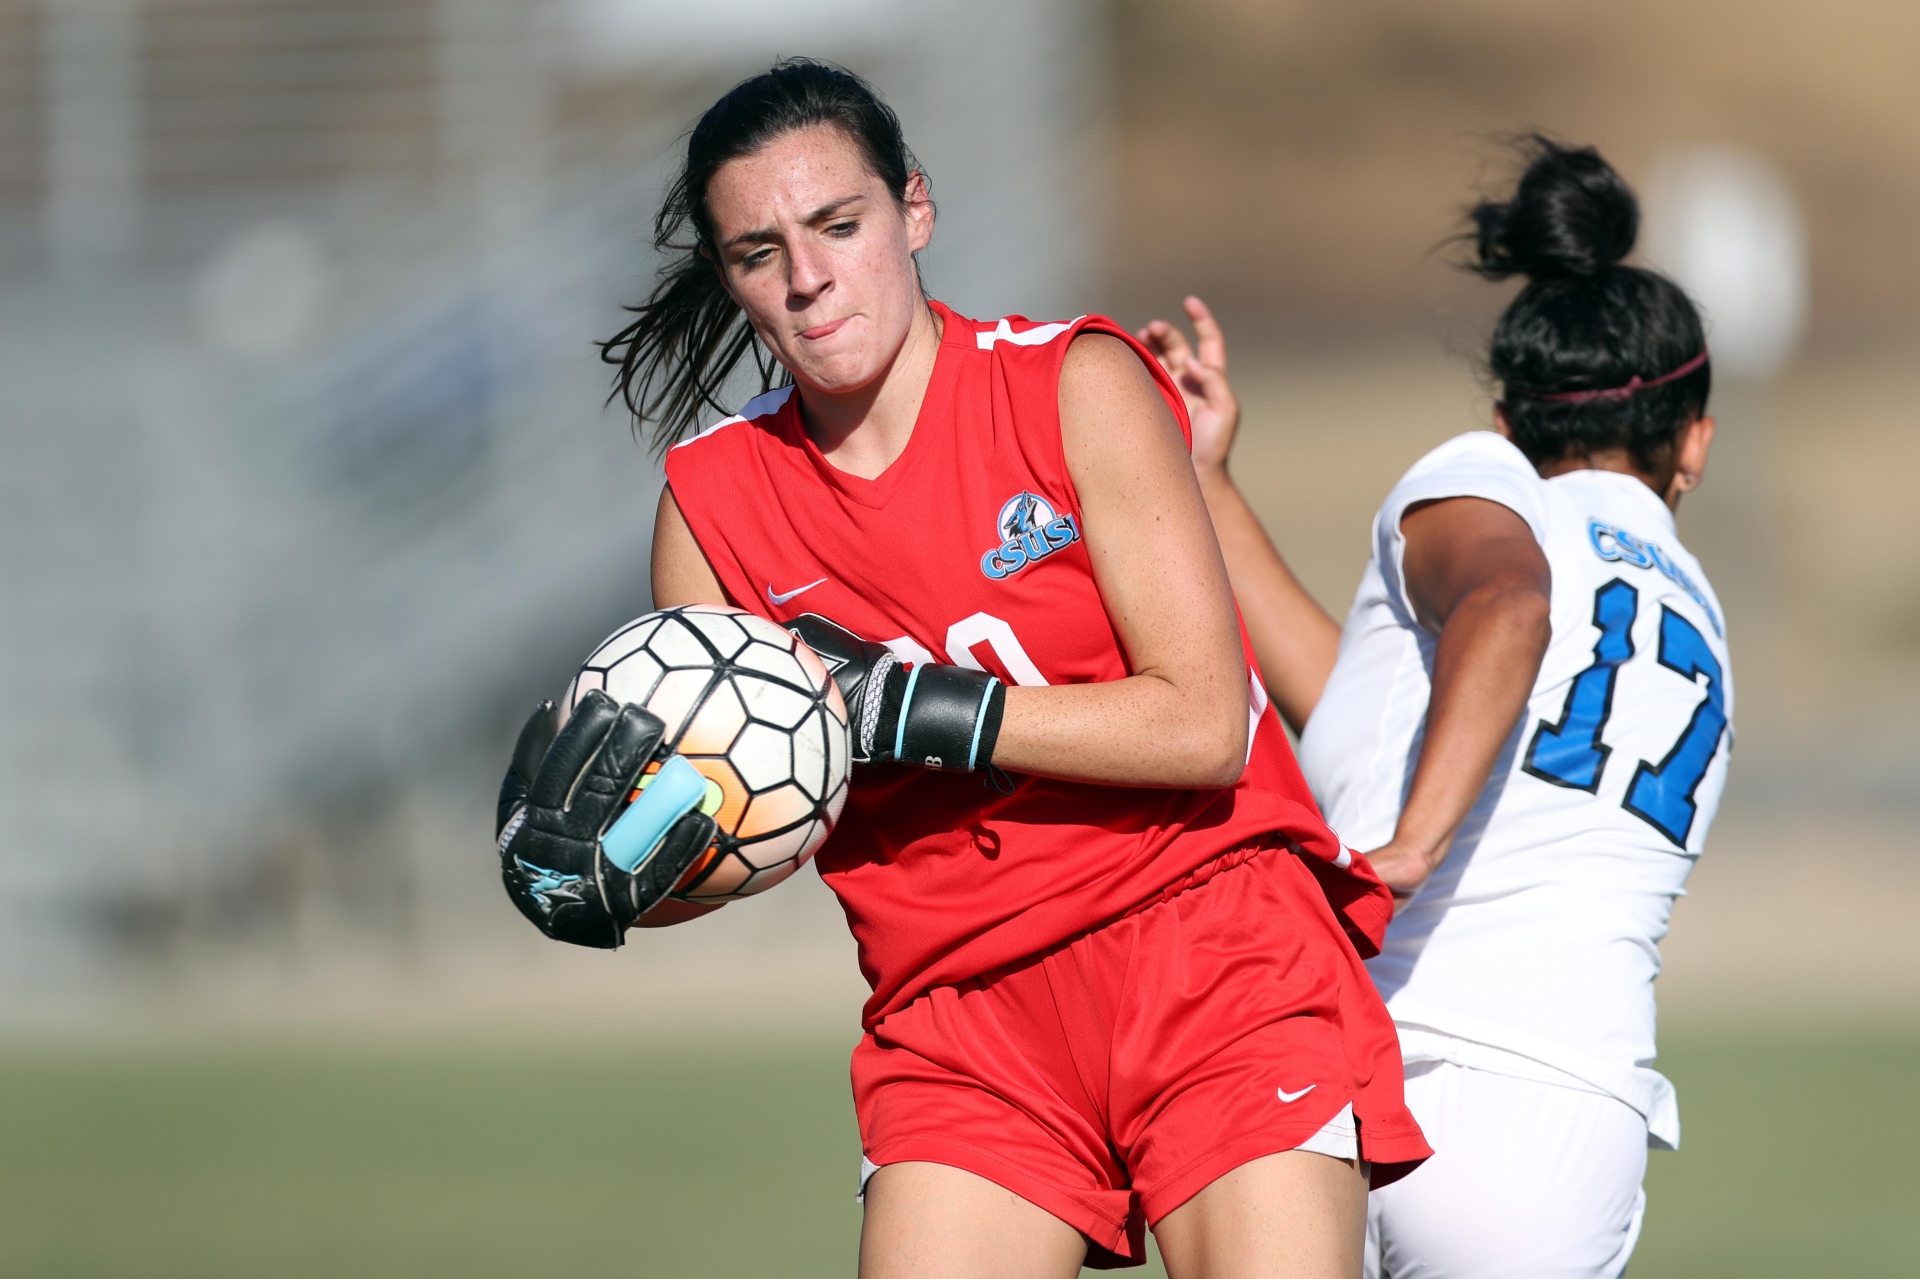 Coyotes women’s soccer goalkeeper Carly Luna, a CCAA All-Academic, has added another honor to her student-athlete cap – she is one of 10 women who are semifinalists for the prestigious Arthur Ashe Jr. Sports Scholar of the year, the first ever for Cal State San Bernardino to be so named.  Even making the honor more impressive is that Luna was selected from a pool of about 1,000 student athletes in all three of the NCAA’s divisions nationwide.  “I am so honored to be recognized as a semifinalist for the Arthur Ashe Sports Scholar of the Year Award,” said Luna, a sophomore majoring in communication studies from San Pedro. “Receiving this recognition means so much to me, as I work diligently on and off the field to represent my school in a positive way. The academic and athletic support I receive from coaches and advisors has given me the ability to succeed in every aspect of my college journey. I couldn't be prouder to be a Yote!”  During the 2019 season, Luna started in 16 matches as a goalkeeper and only allowed 1.68 goals per game. She made 86 saves and posted three shutouts. In the classroom, the focus of her studies is on media studies, with a minor in film studies. She holds a 3.83 grade-point average and has been on the Dean’s List five times.  Luna also is active in her local community, managing American Red Cross Blood Drives for three years. With her teammates she volunteered to work with children at Loma Linda University Children’s Hospital. Luna volunteered at Ecofest to encourage people to better their environment, also at a Vacation Bible School at Calvary Chapel South Bay for seven summers. In addition, she has served as a youth coach for K-Bear Soccer Camp and the American Youth Soccer Organization.